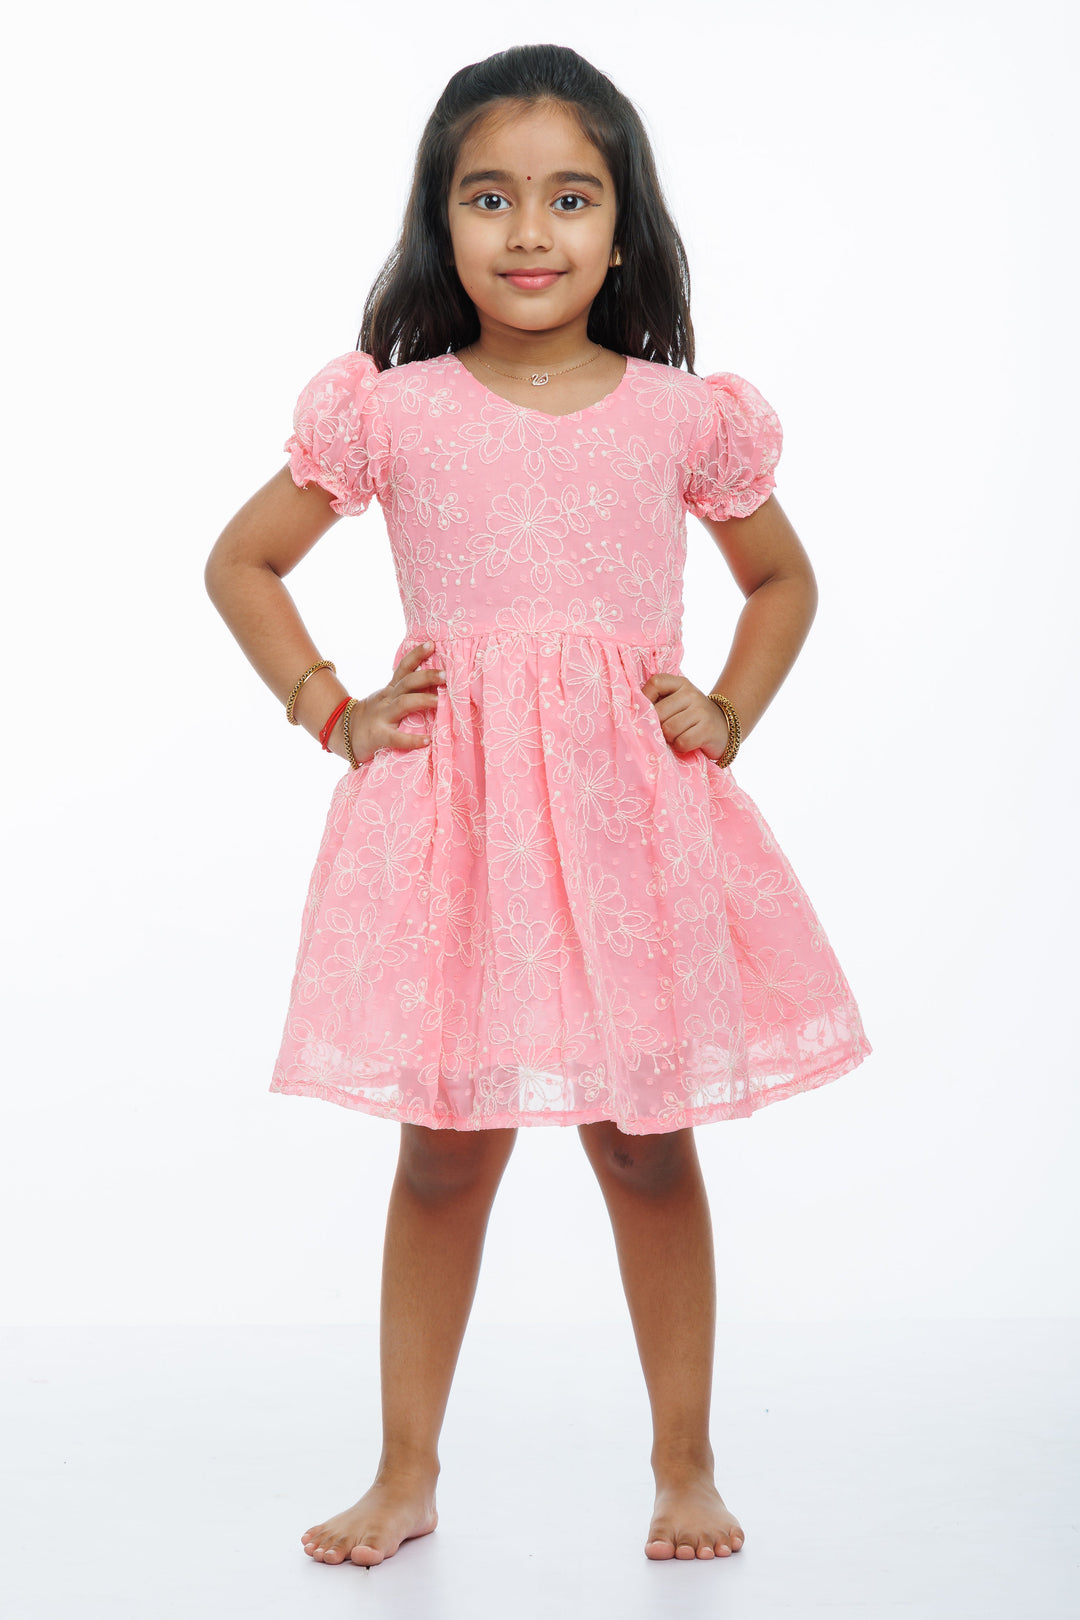 The Nesavu Girls Cotton Frock Sweet Blossom Pink Cotton Frock for Girls with Delicate Embroidery Nesavu 20 (3Y) / Pink / Georgette GFC1276A-20 Girls Embroidered Pink Cotton Summer Dress | Traditional & Trendy | The Nesavu